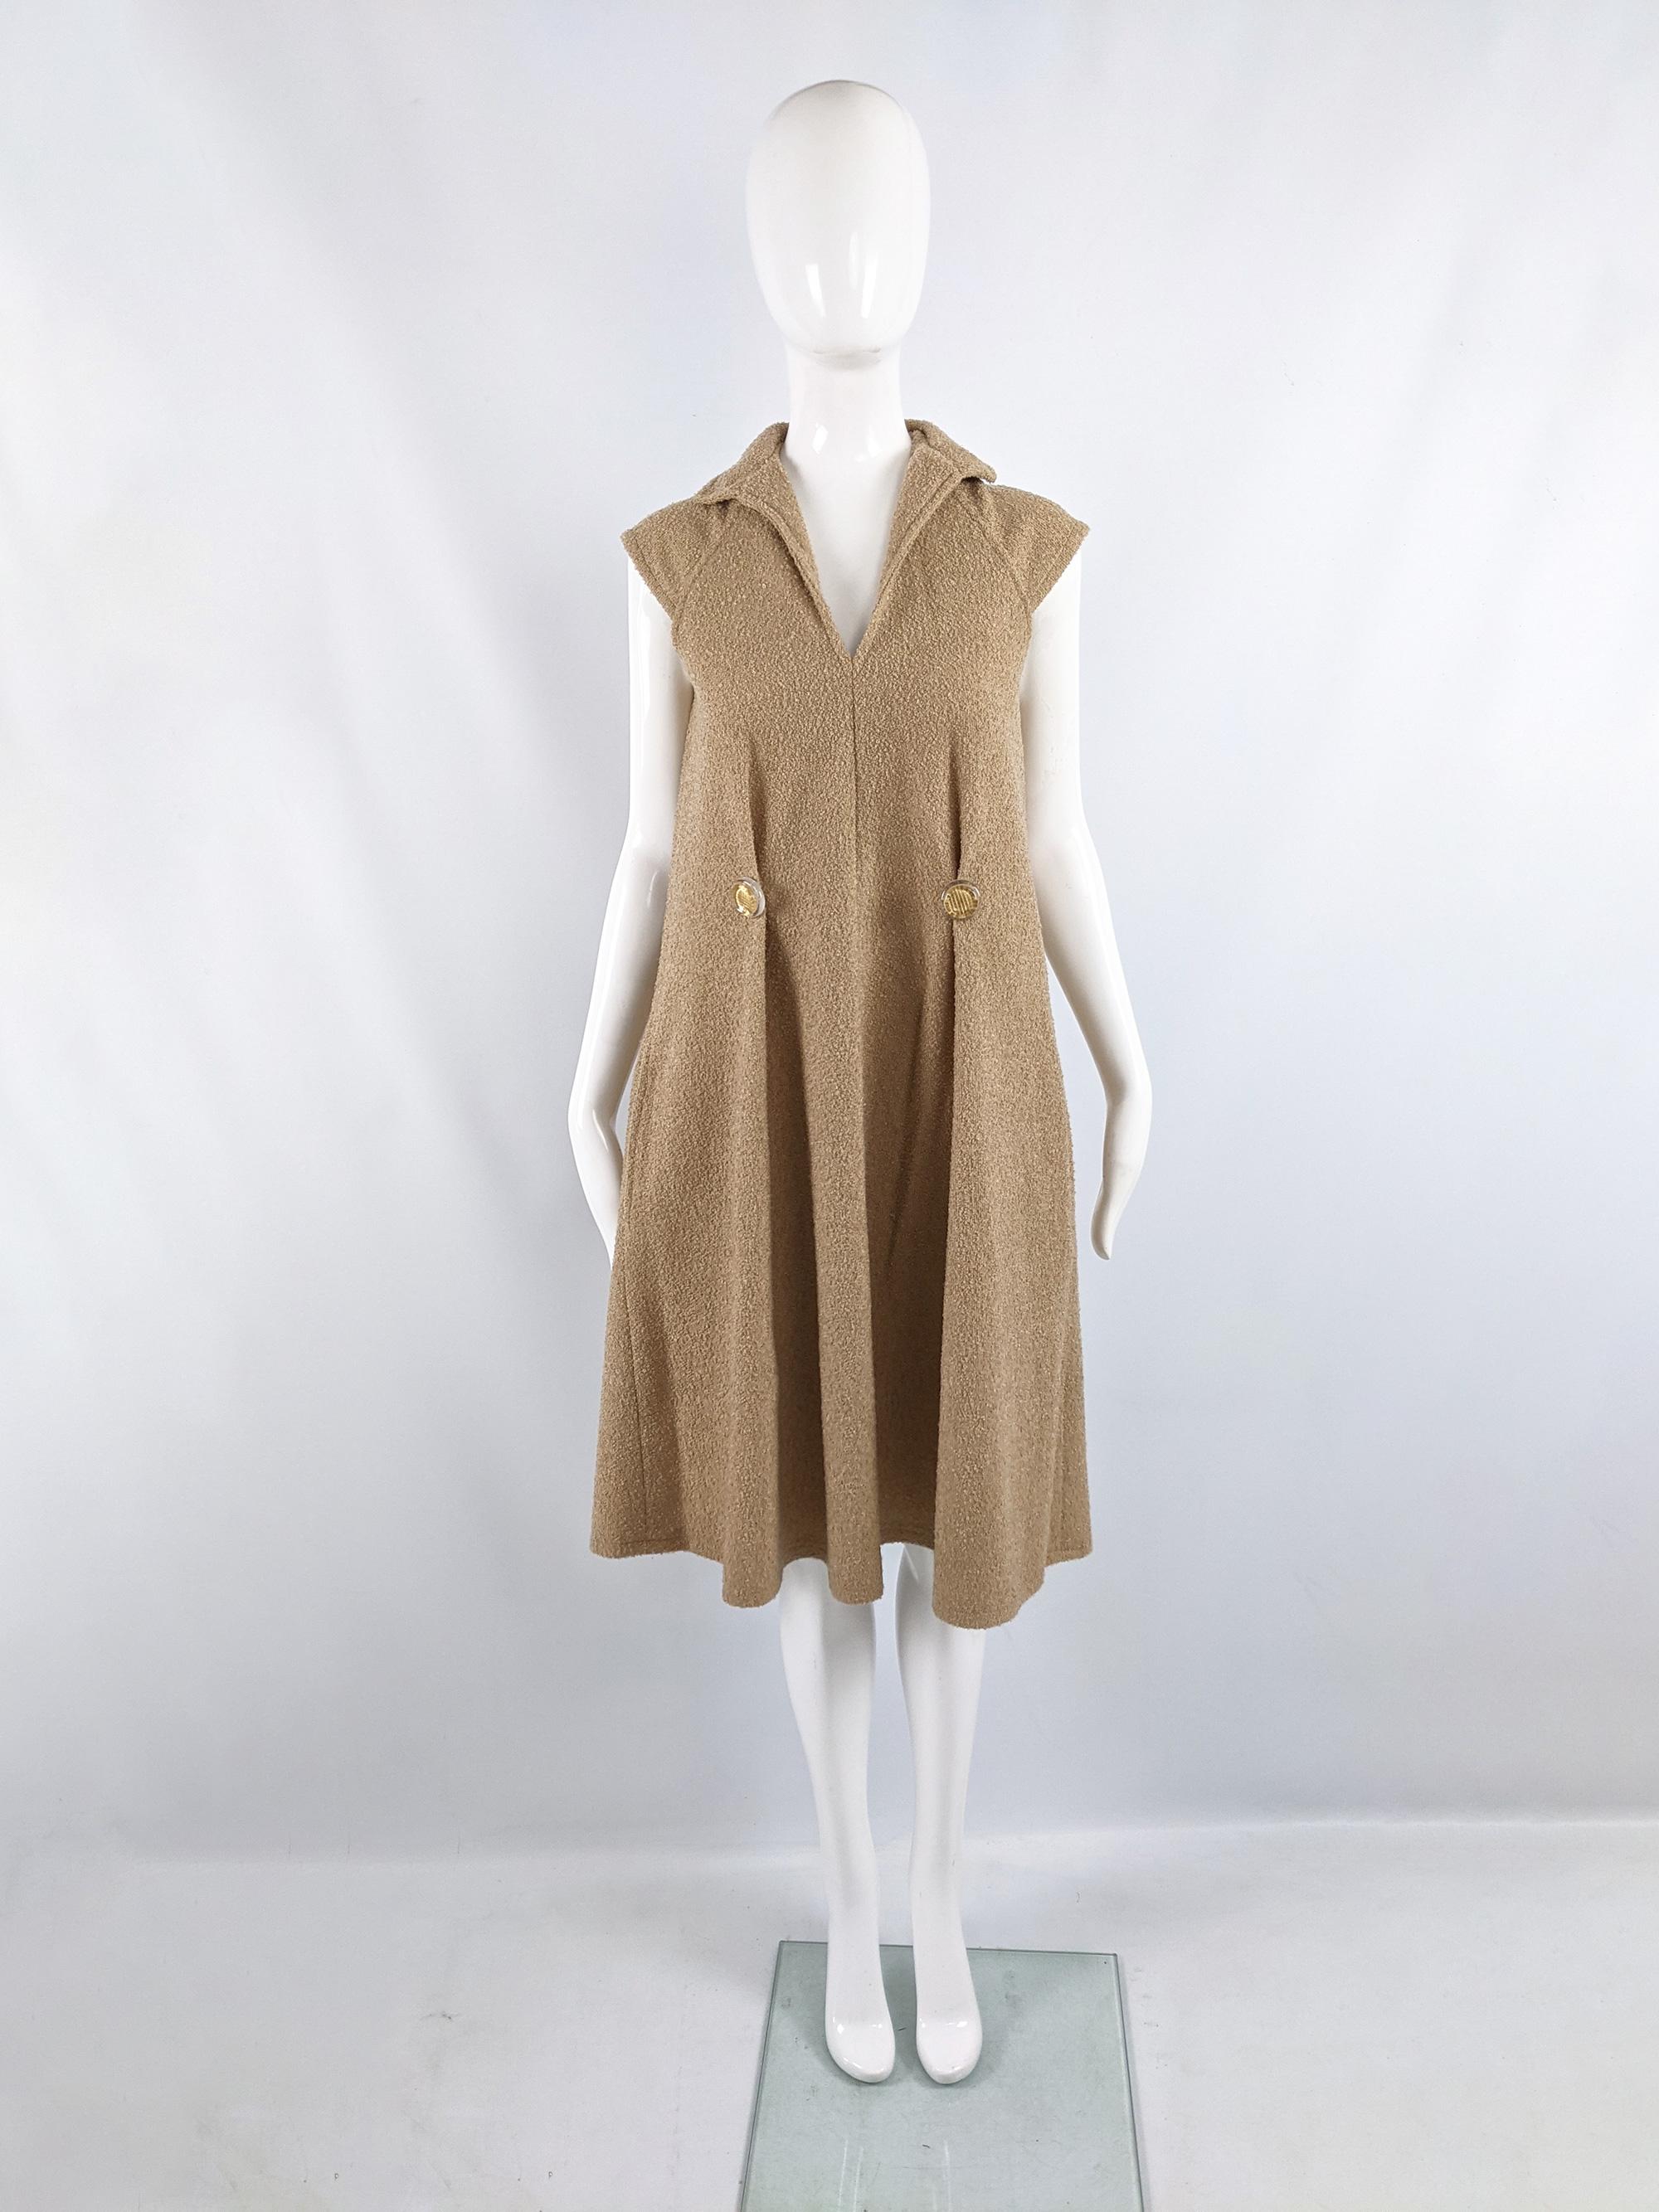 A chic vintage womens dress from the 70s by British label, Allander. In a tan bouclé fabric with cap sleeves and an incredible loose tent / a line shape and cap sleeves that give a minimalist look. It has statement, decorative acrylic buttons at the